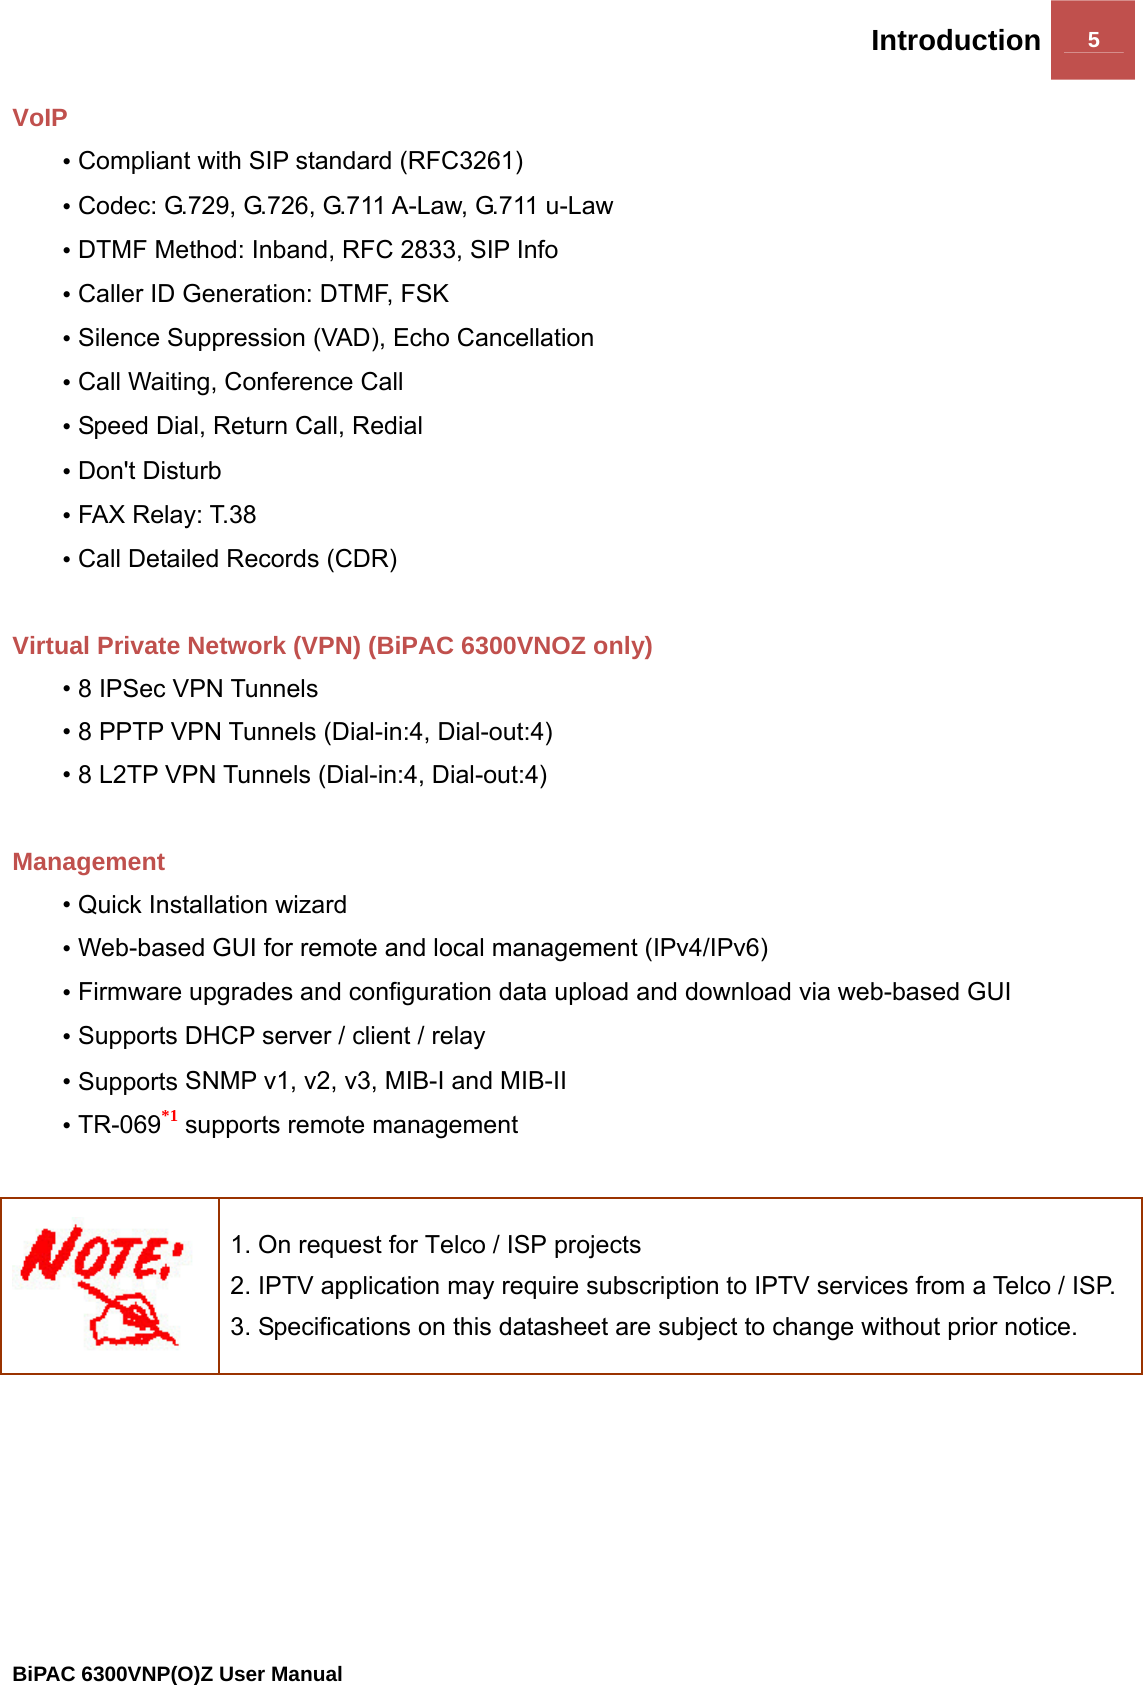 Introduction 5                                                BiPAC 6300VNP(O)Z User Manual  VoIP • Compliant with SIP standard (RFC3261) • Codec: G.729, G.726, G.711 A-Law, G.711 u-Law • DTMF Method: Inband, RFC 2833, SIP Info • Caller ID Generation: DTMF, FSK • Silence Suppression (VAD), Echo Cancellation • Call Waiting, Conference Call • Speed Dial, Return Call, Redial • Don&apos;t Disturb • FAX Relay: T.38 • Call Detailed Records (CDR)  Virtual Private Network (VPN) (BiPAC 6300VNOZ only) • 8 IPSec VPN Tunnels • 8 PPTP VPN Tunnels (Dial-in:4, Dial-out:4) • 8 L2TP VPN Tunnels (Dial-in:4, Dial-out:4)  Management • Quick Installation wizard • Web-based GUI for remote and local management (IPv4/IPv6) • Firmware upgrades and configuration data upload and download via web-based GUI • Supports DHCP server / client / relay • Supports SNMP v1, v2, v3, MIB-I and MIB-II • TR-069*1 supports remote management   1. On request for Telco / ISP projects 2. IPTV application may require subscription to IPTV services from a Telco / ISP. 3. Specifications on this datasheet are subject to change without prior notice.   